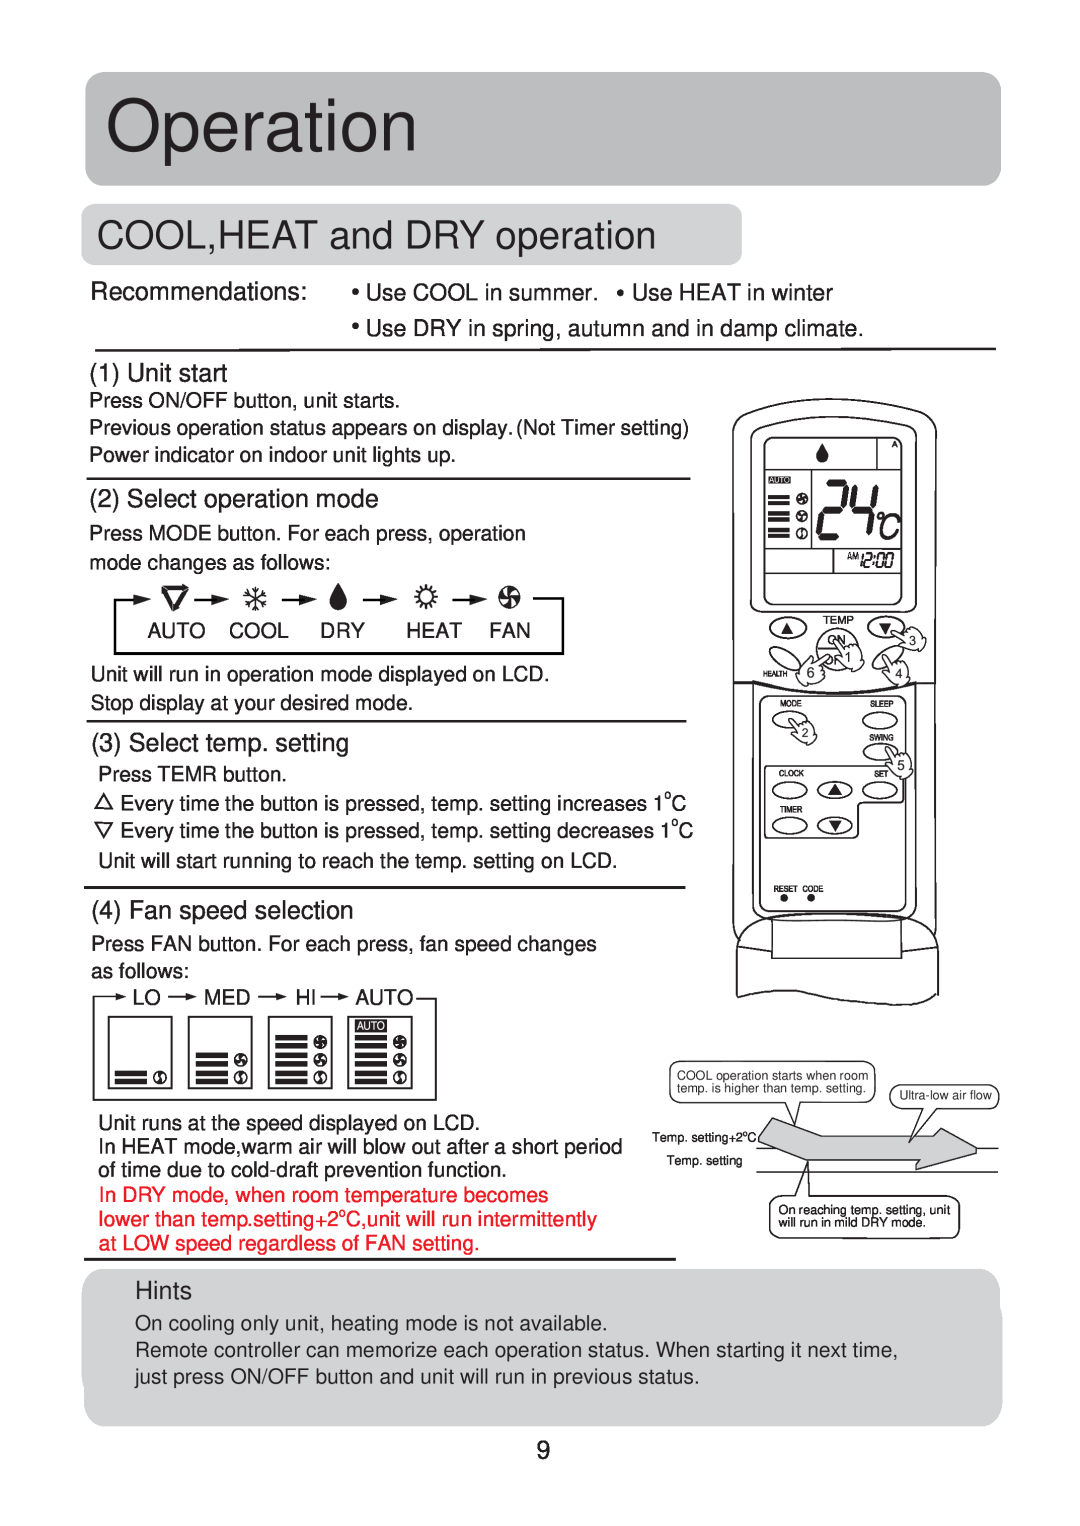 Haier HSU-18CK13(T3) COOL,HEAT and DRY operation, Operation, Unit start, Select operation mode, Select temp. setting 